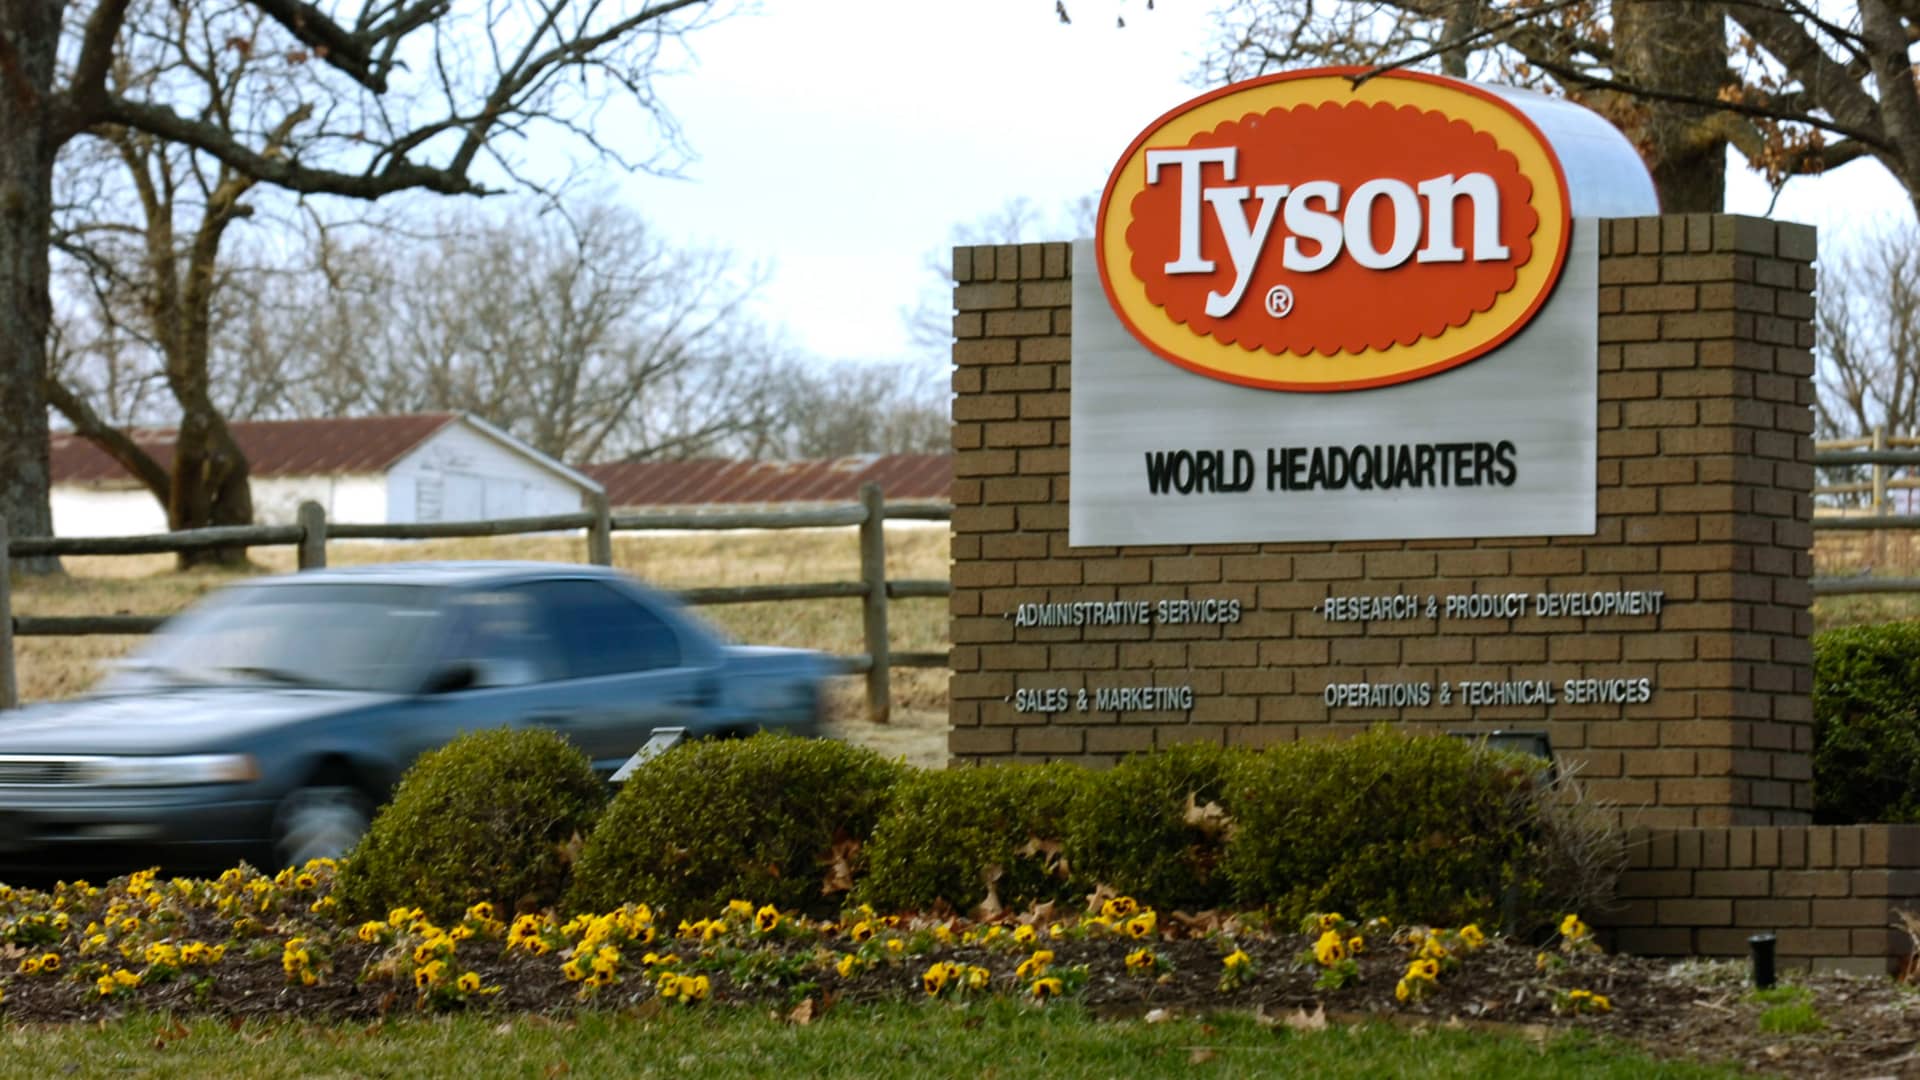 Tyson Foods Inc., sign at Tyson headquarters in Springdale, Ark.